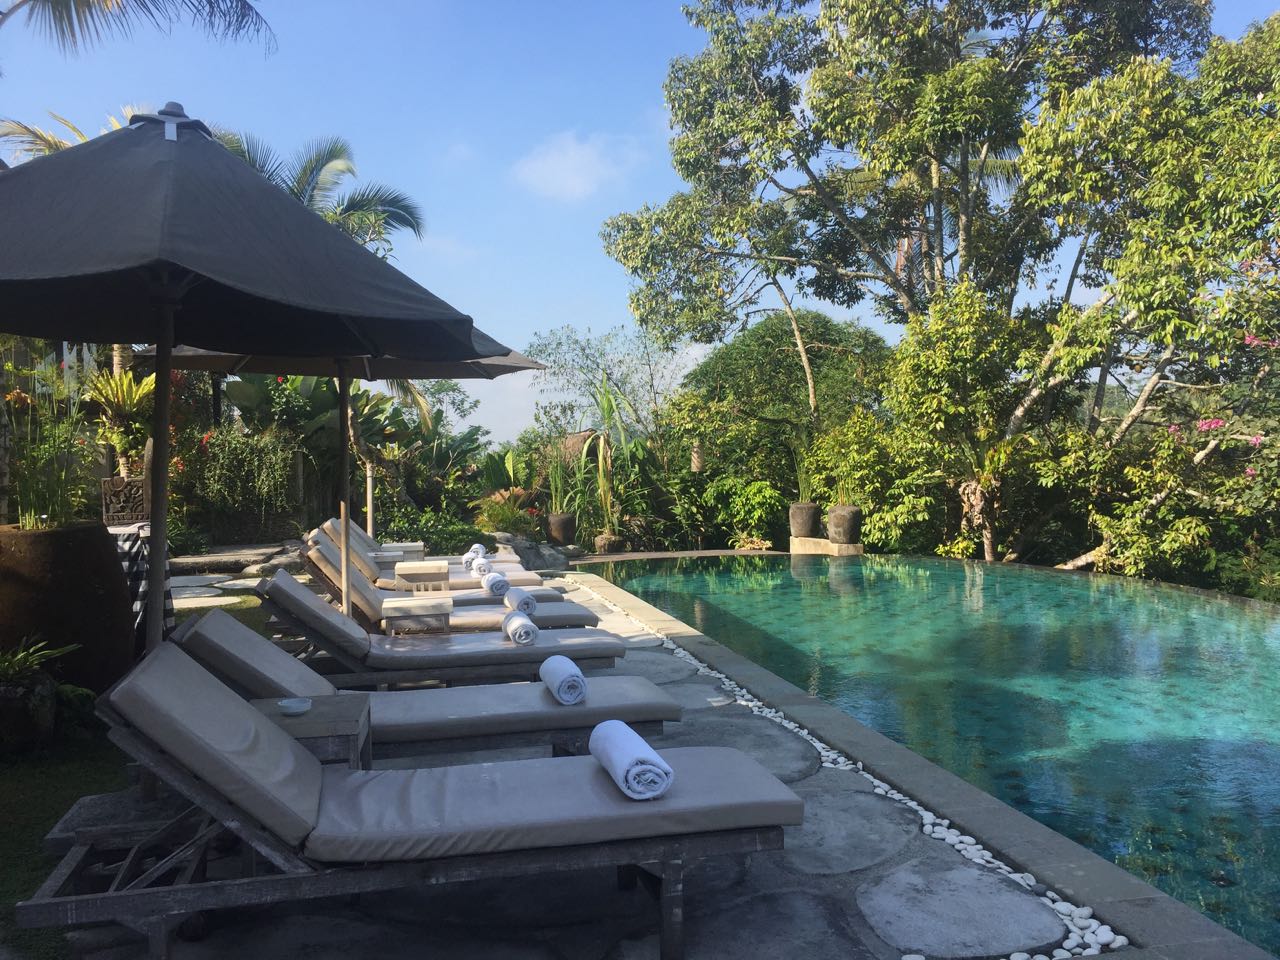 The Many Faces of Sustainable Tourism - My Week in Bali | HuffPost